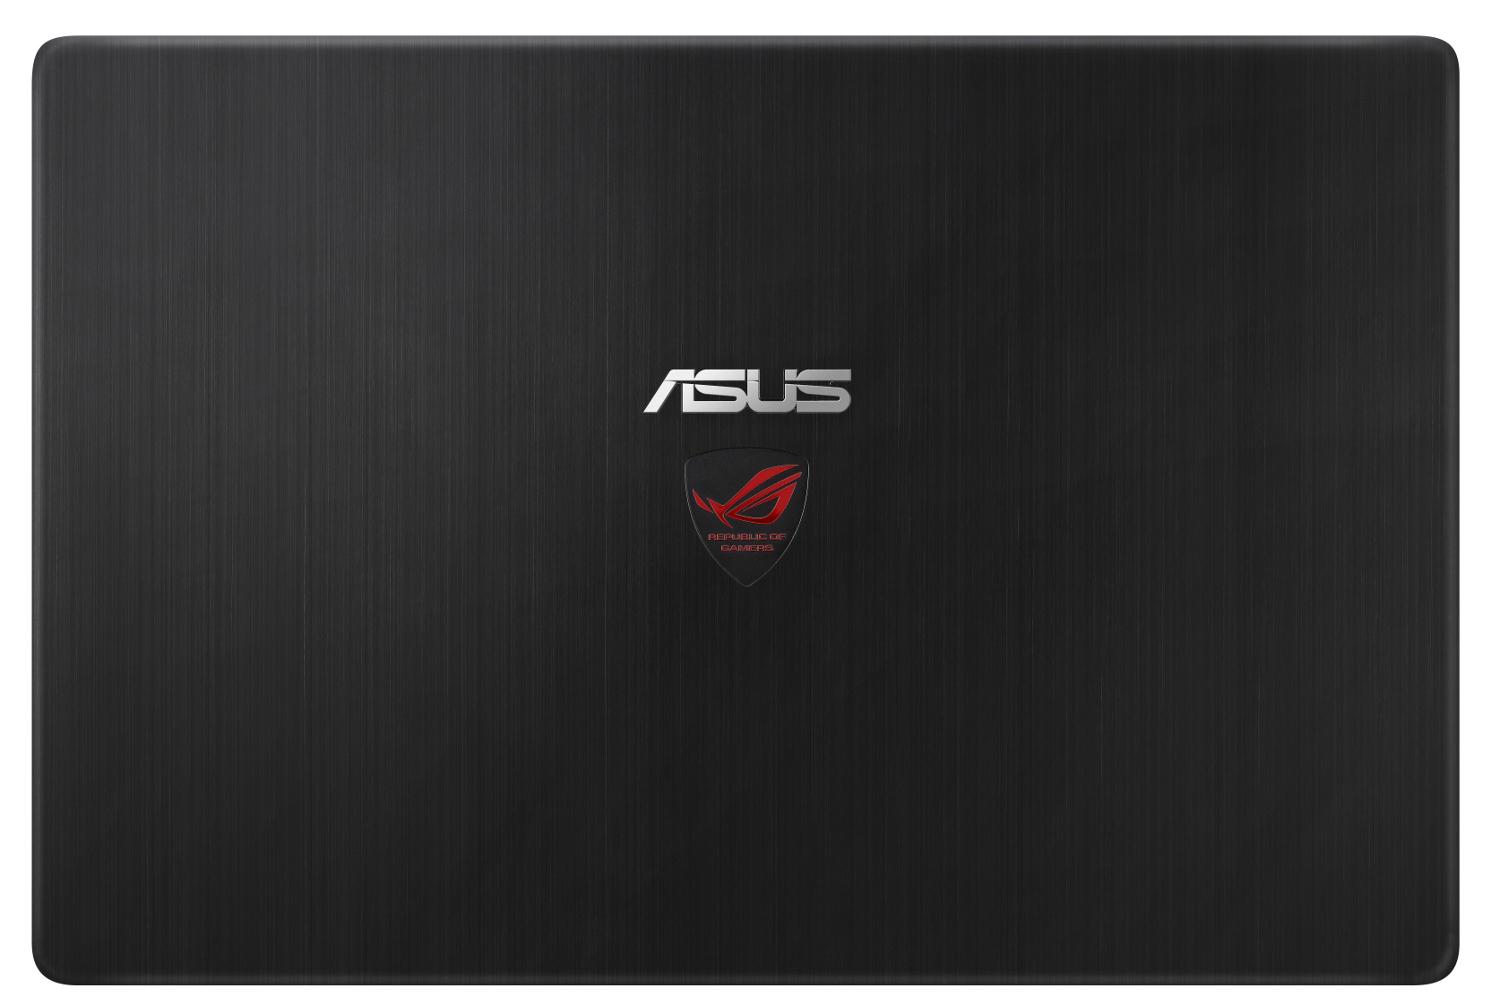 asus announces new lightweight g501 gaming laptop top